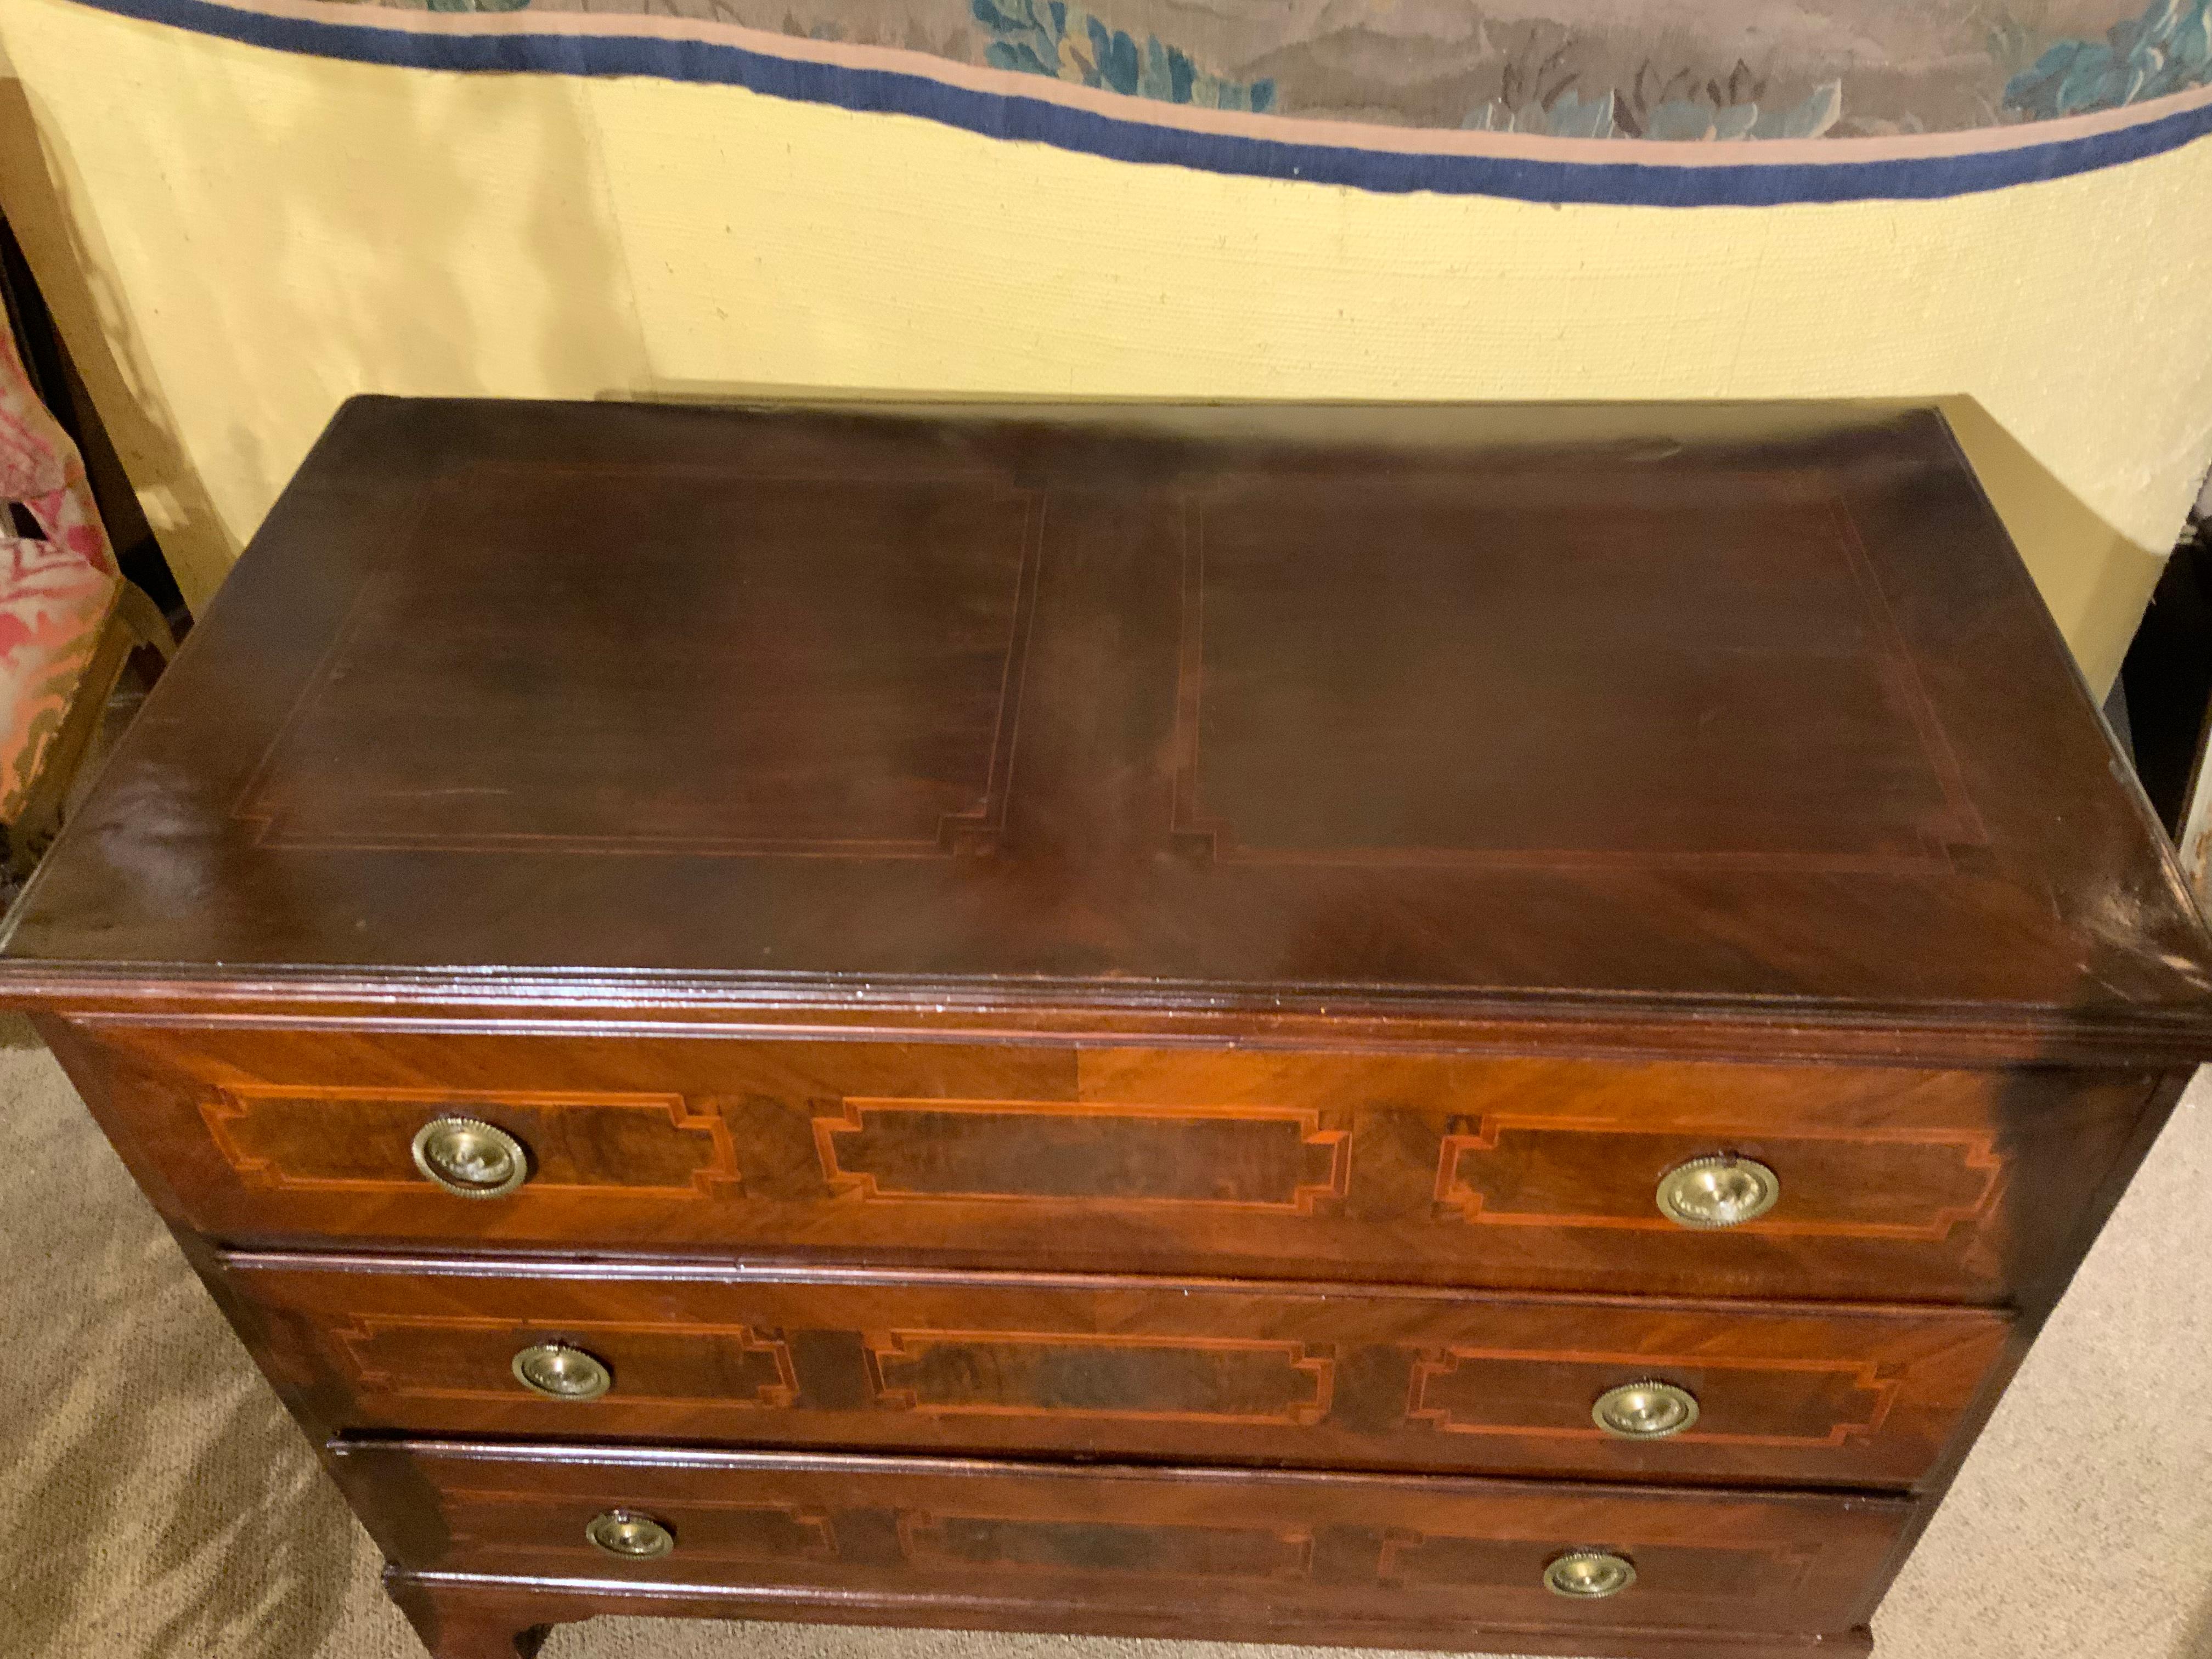 19th c. Chest with three deep drawers that slide easily. It has banding and designs in
Satin wood. Bracket feet.